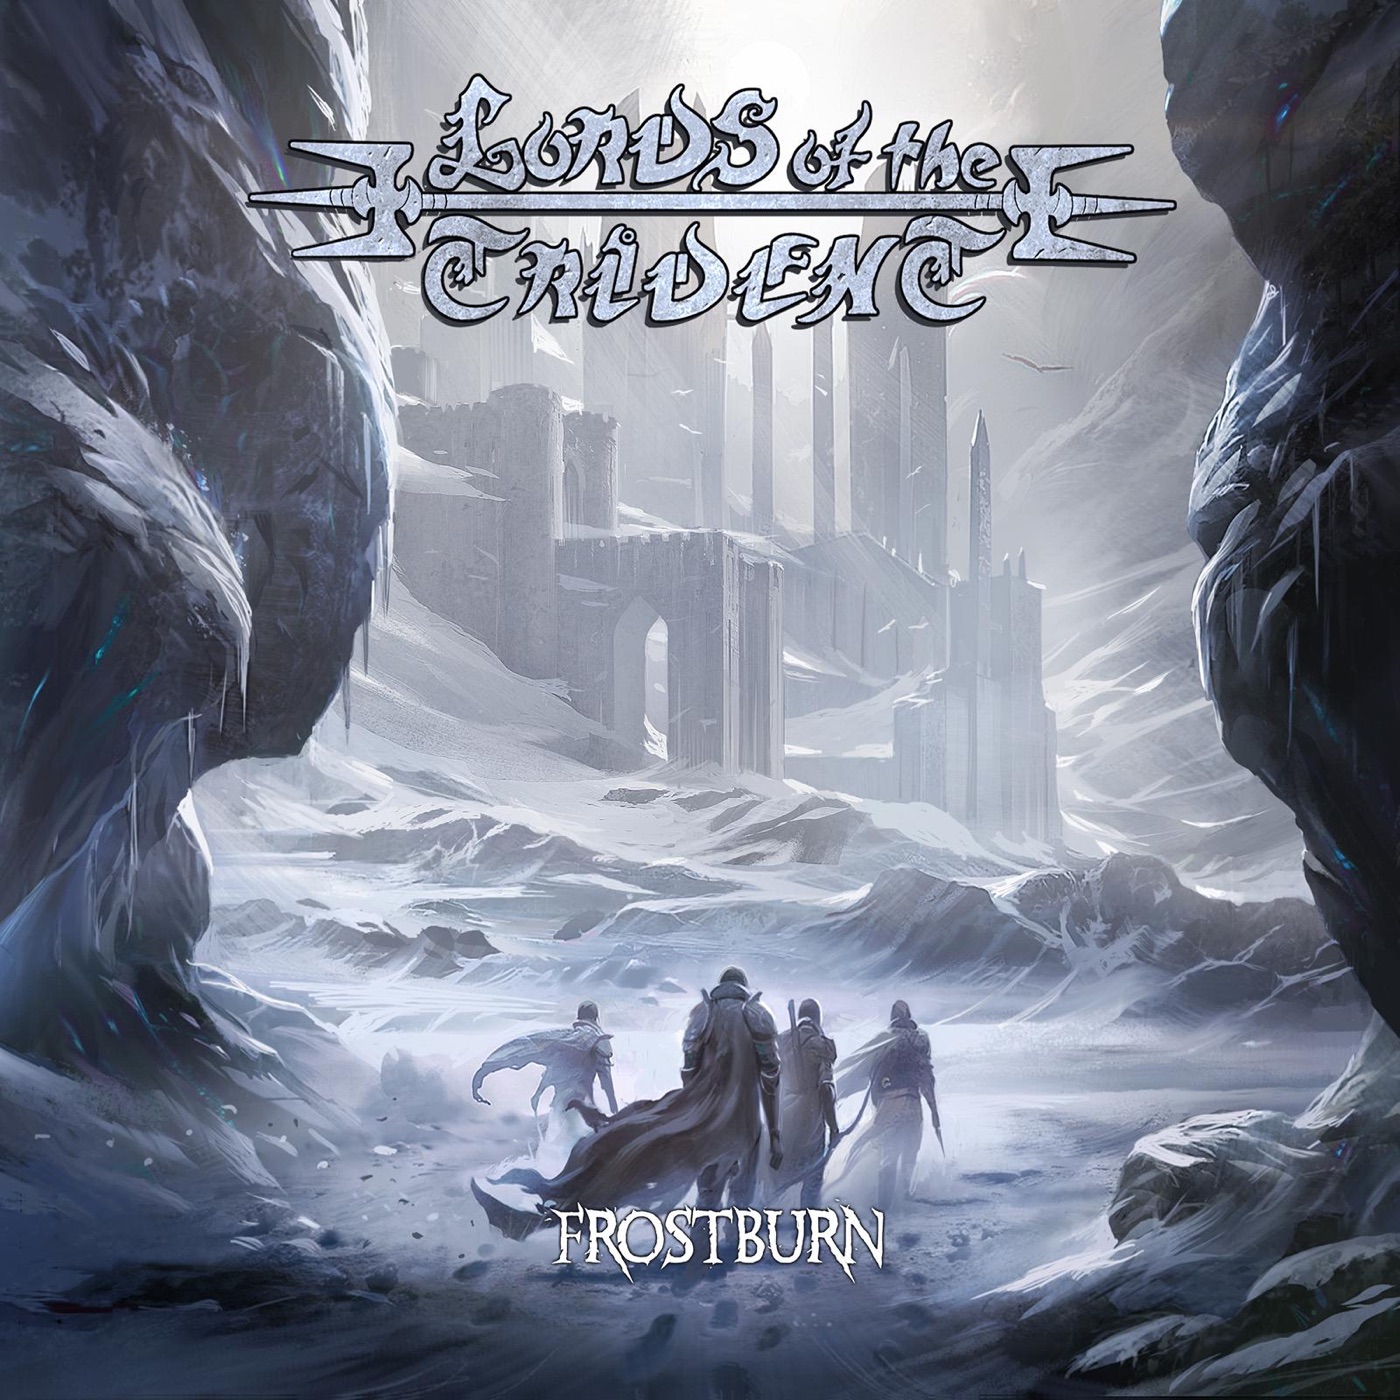 Frostburn by Lords of the Trident